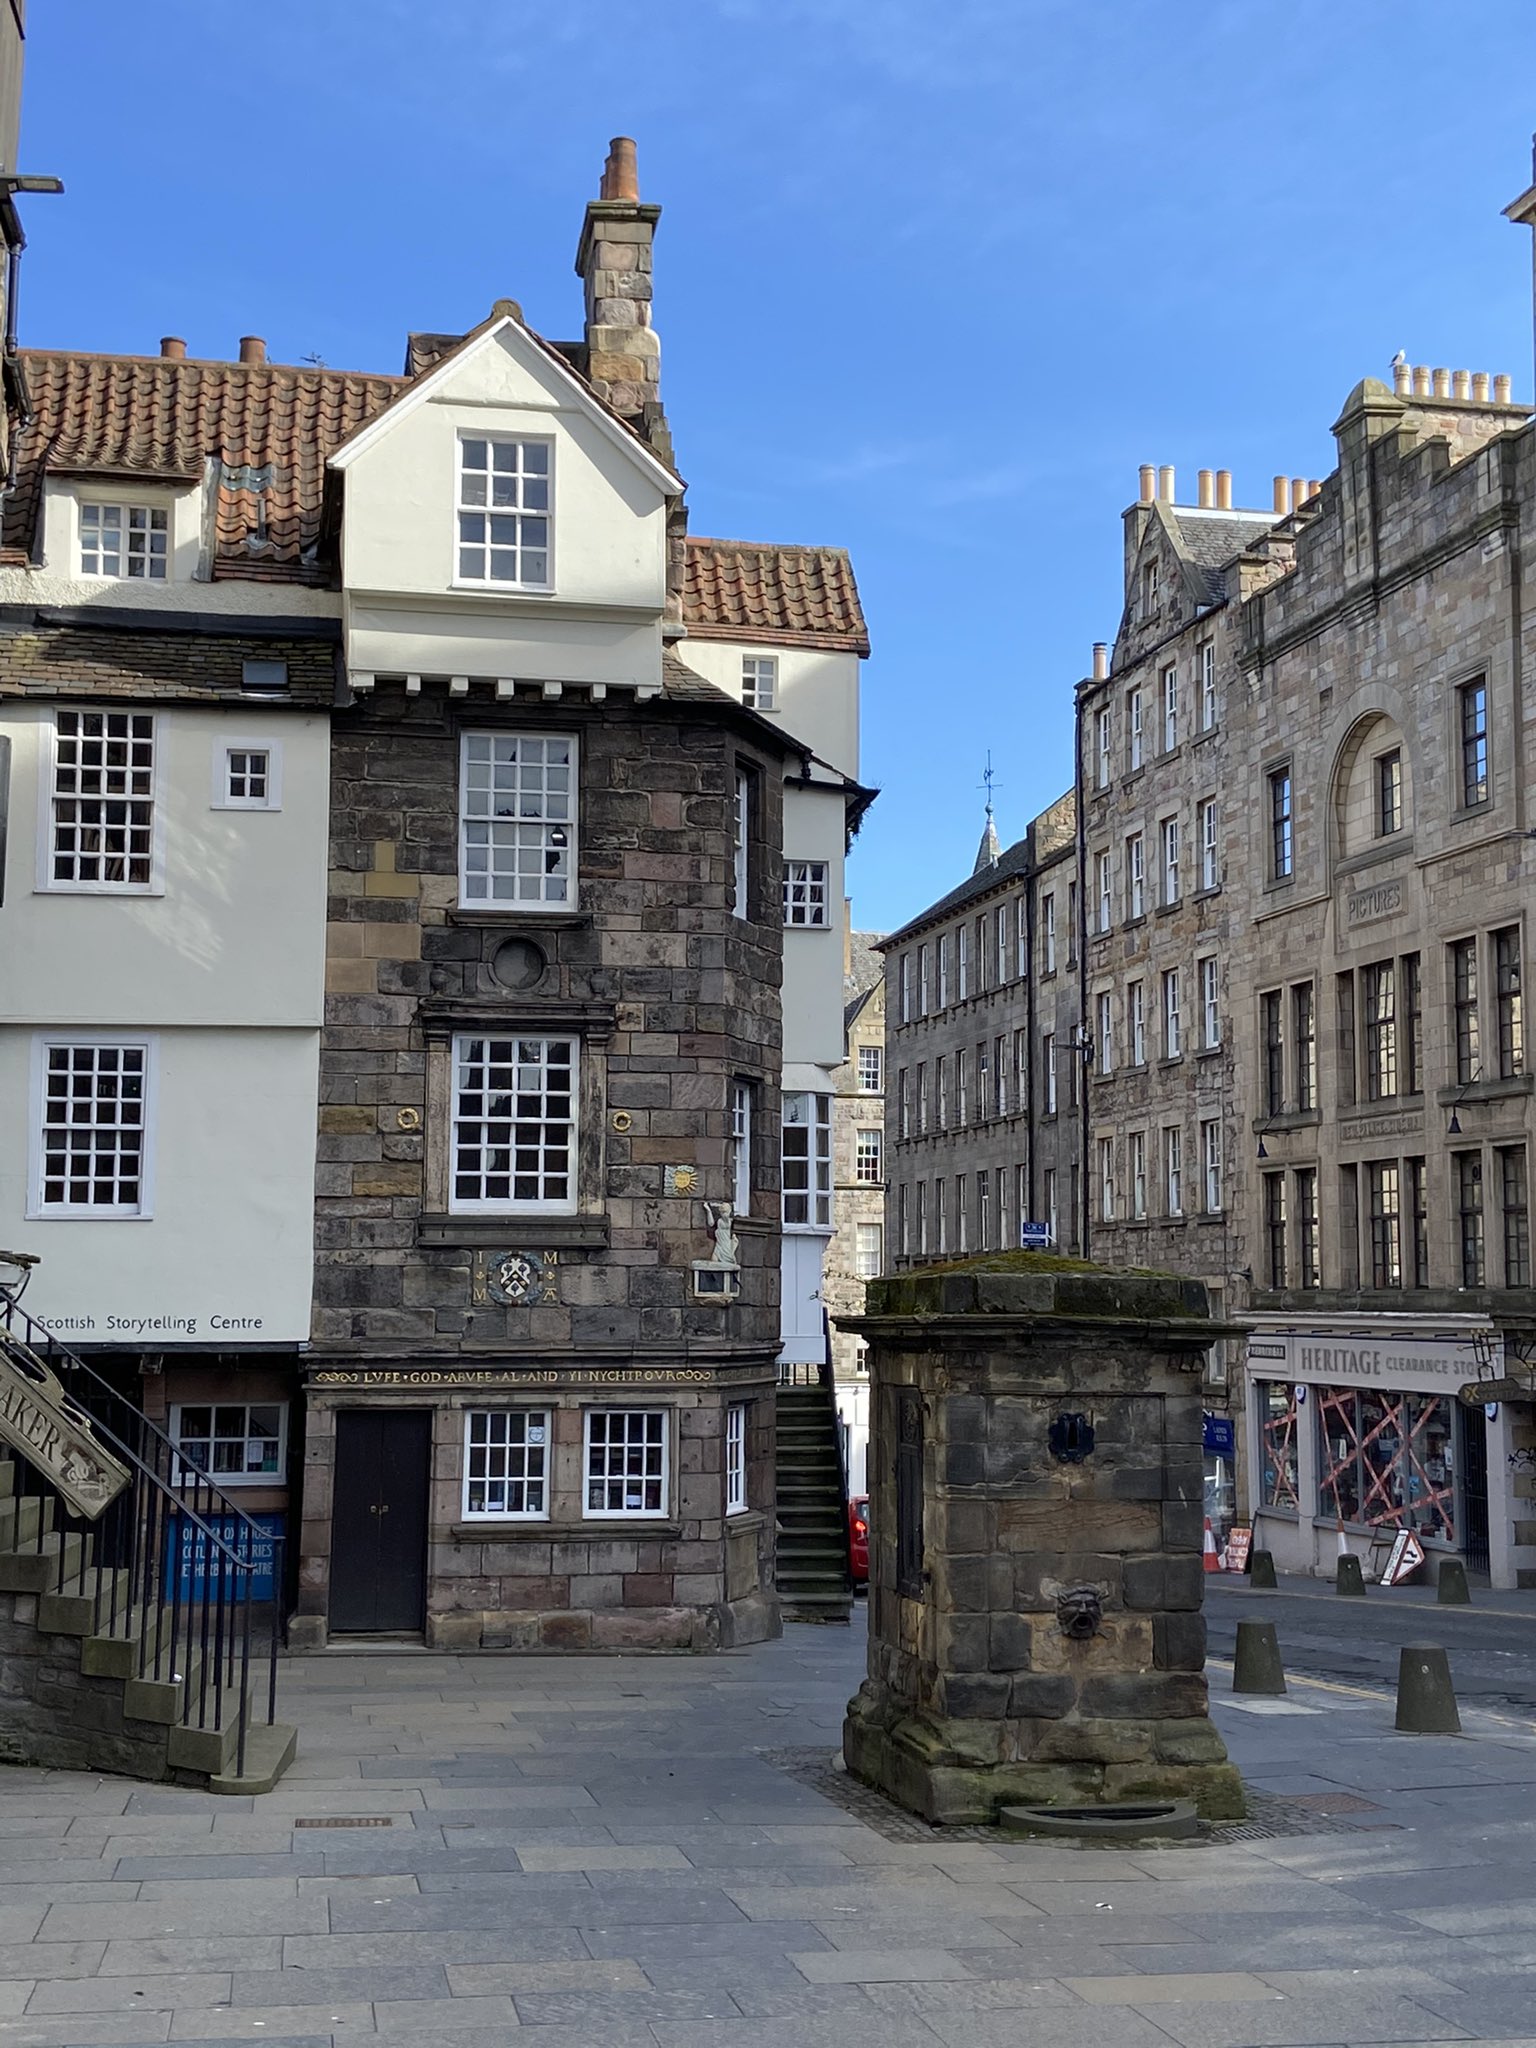 View of John Knox House from the Royal Mile on a sunny day, including the old water fountain on the pavement in front of it.